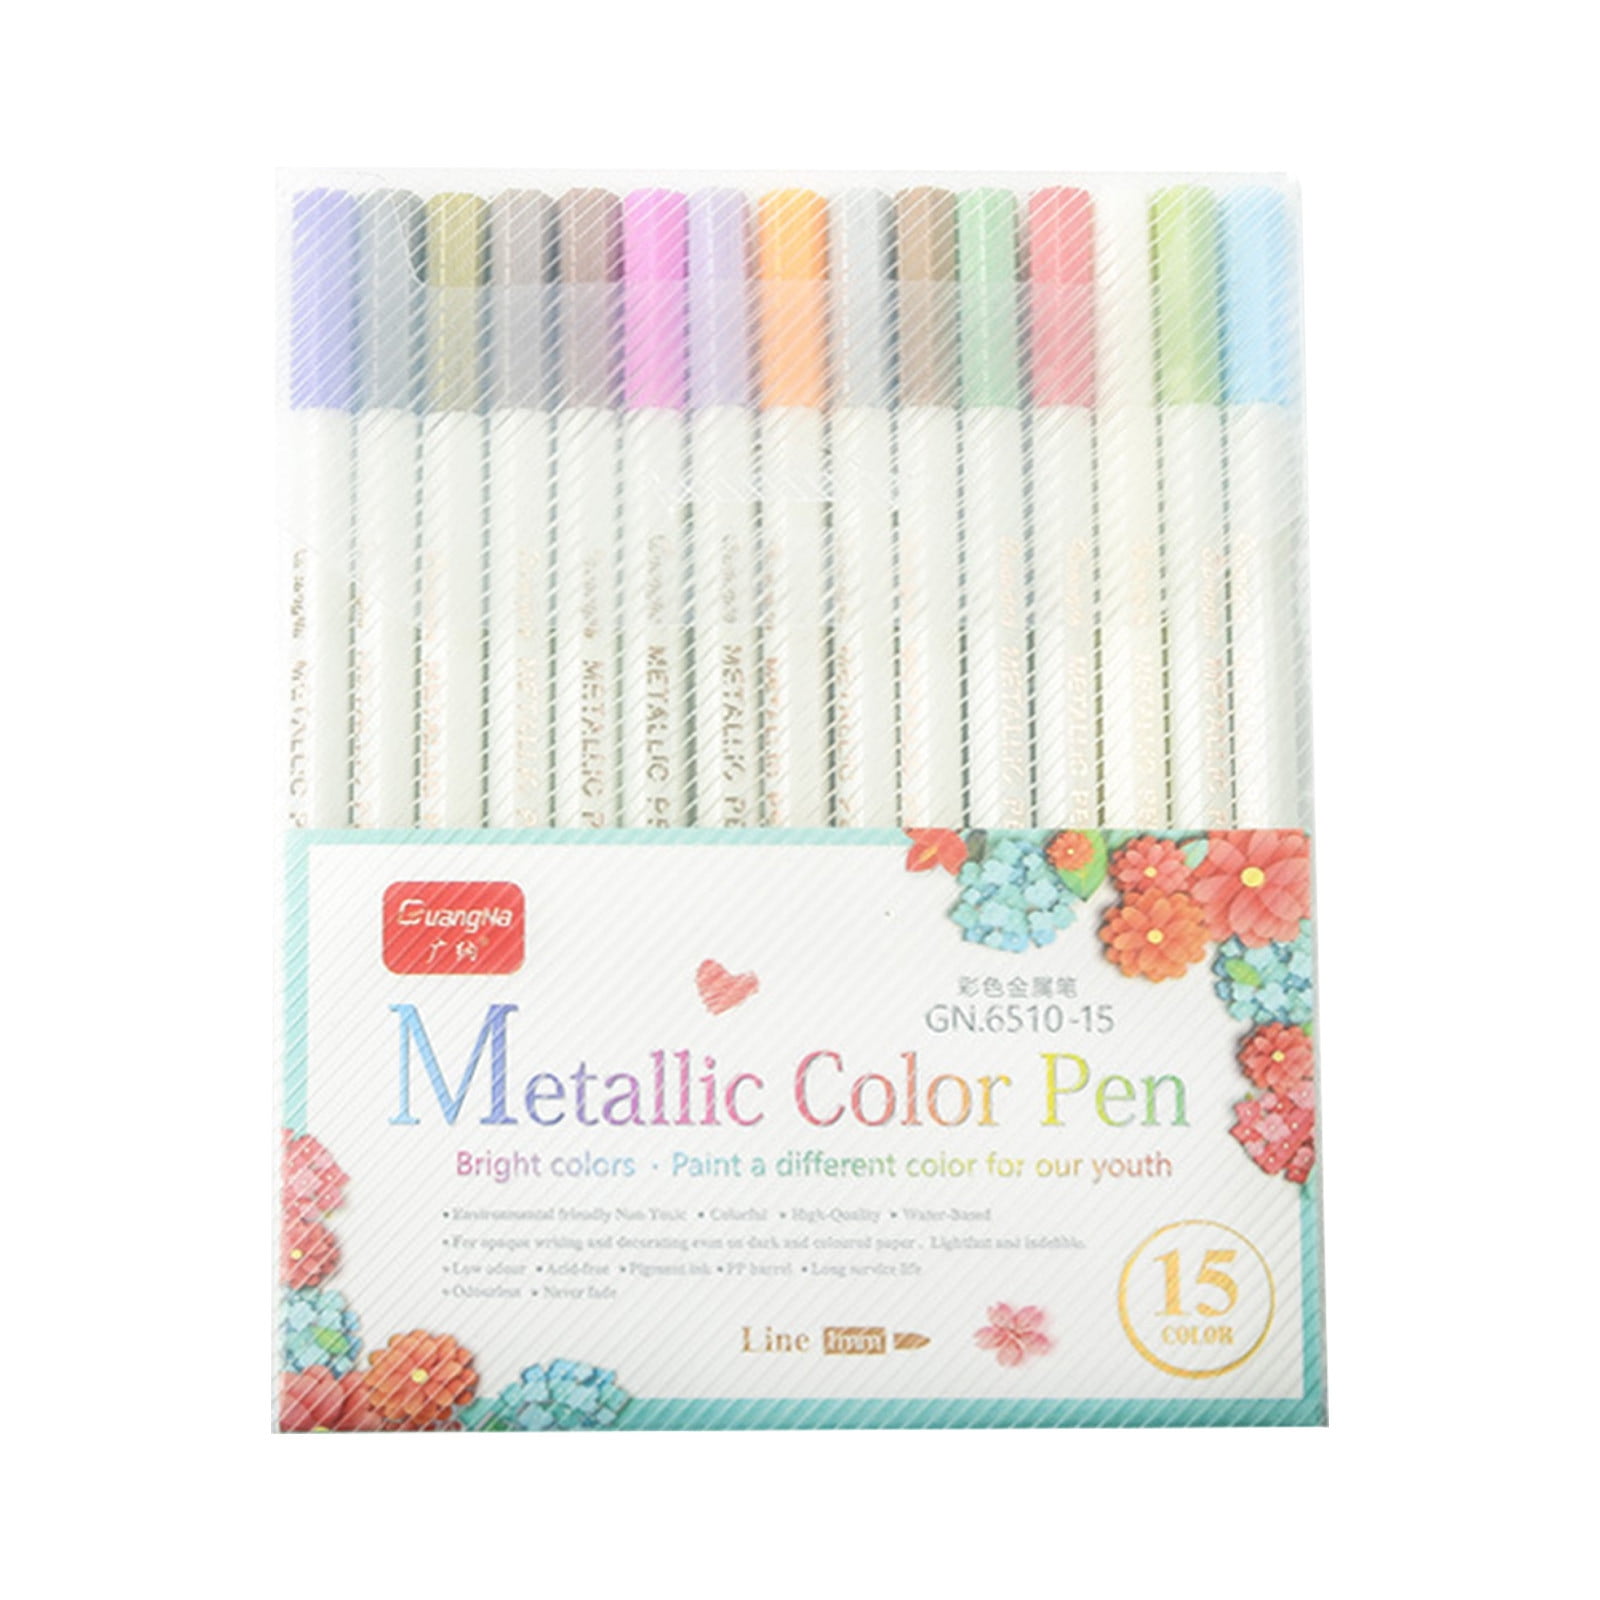 qucoqpe School Supplies Colored Pencils 12 Colors Pencil Set Oily Colored  Painting Pens Oil-based Colored Pencil Painting Colored Pencil Aesthetic  School Supplies 